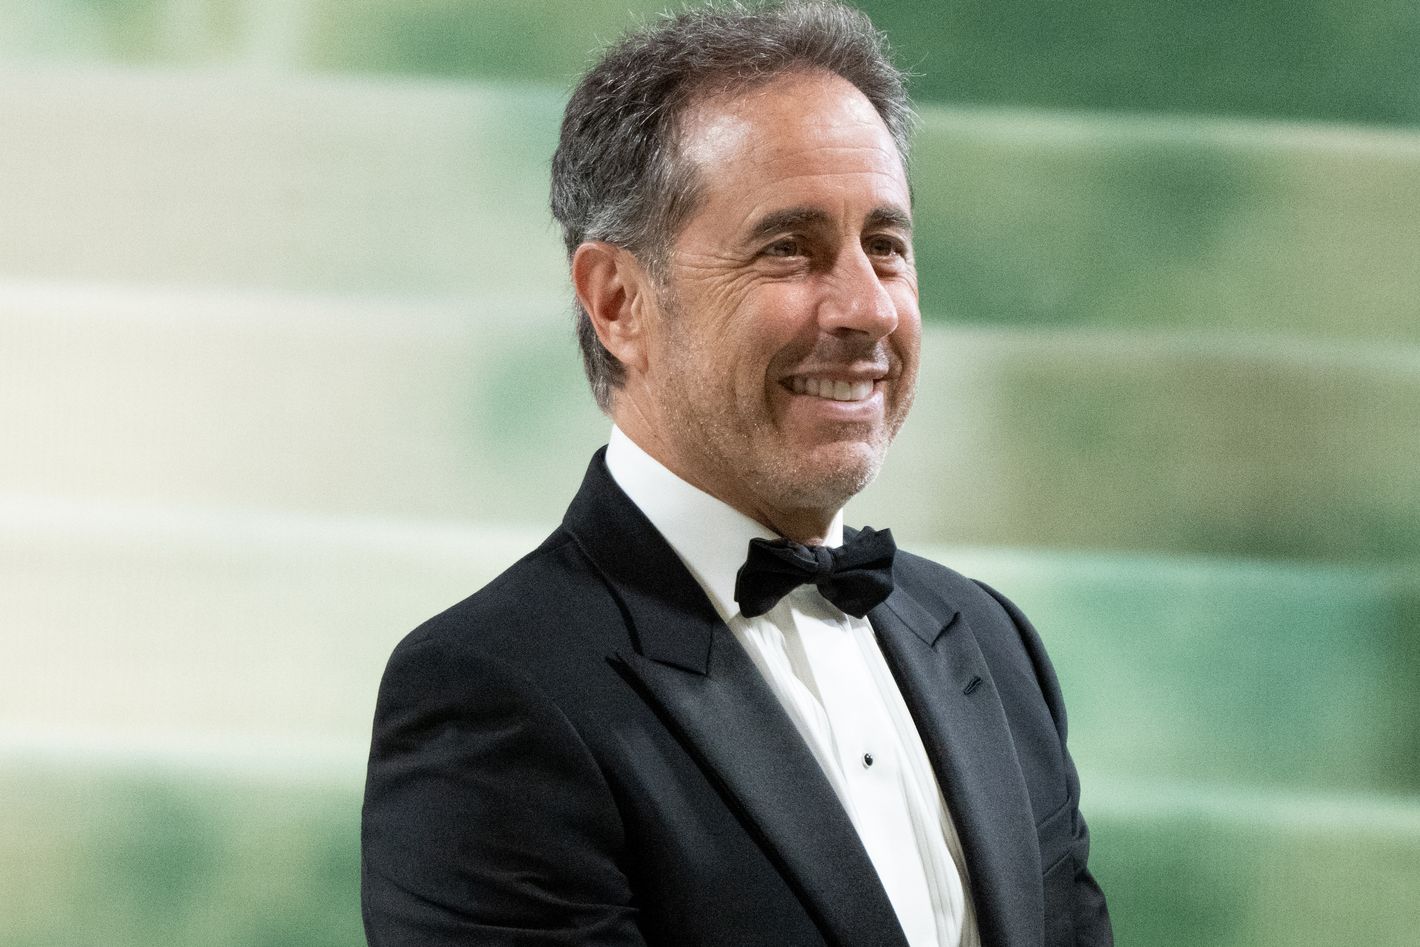 Duke Students Walk Out of Jerry Seinfeld’s Commencement Speech